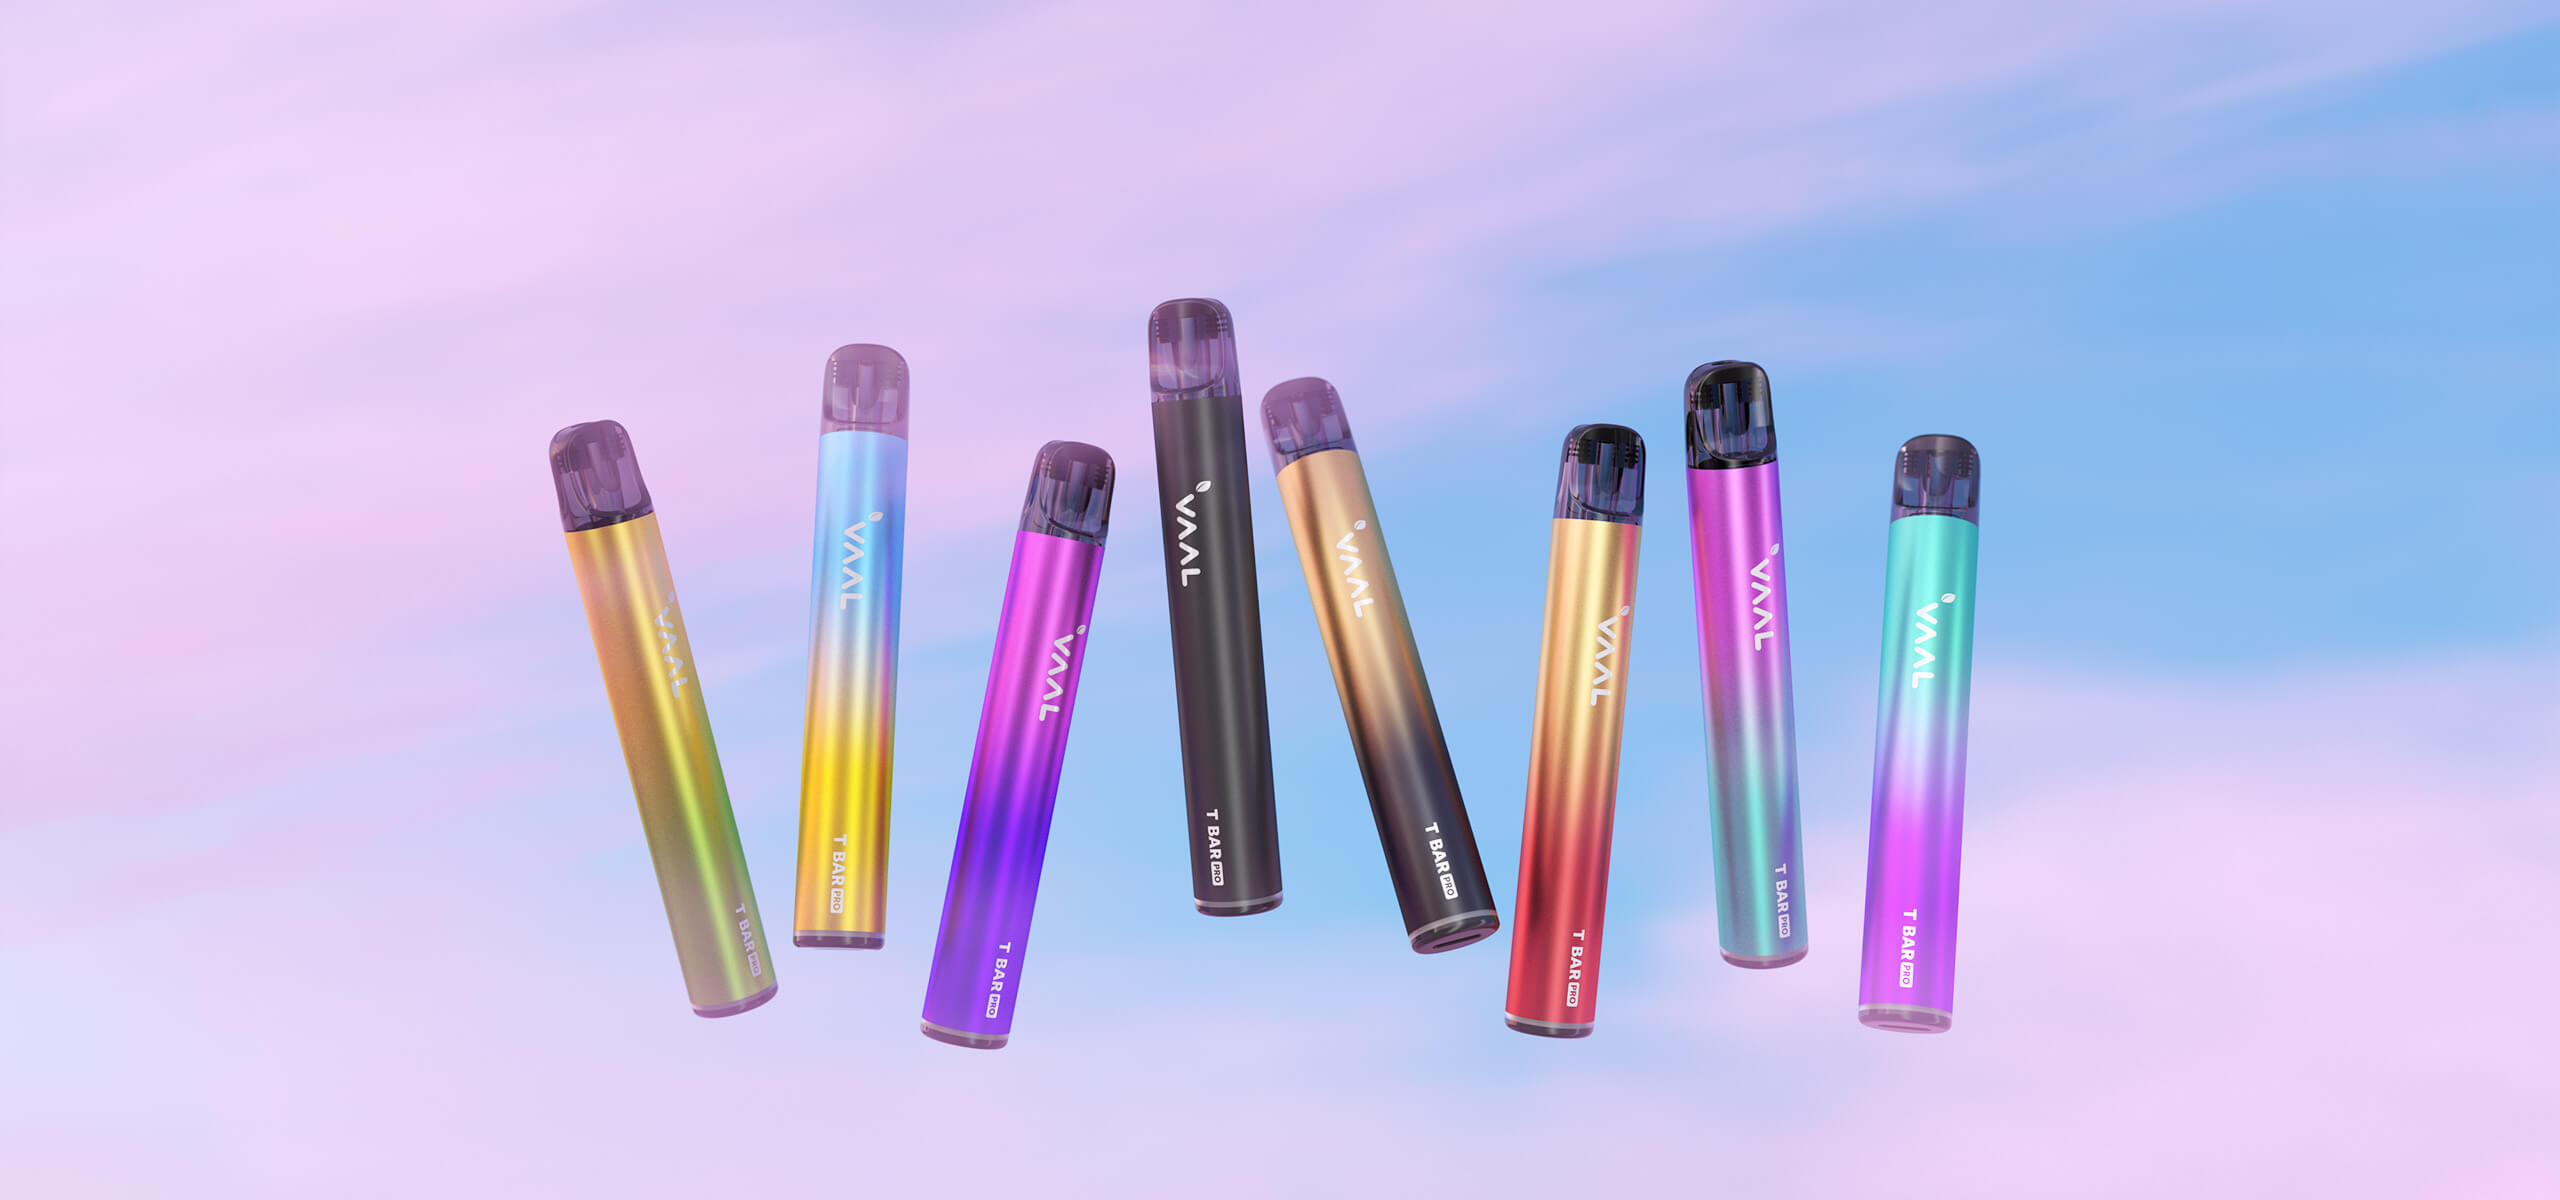 Discover our portable, flavorful, premium vape device, now available in 8 vibrant colors